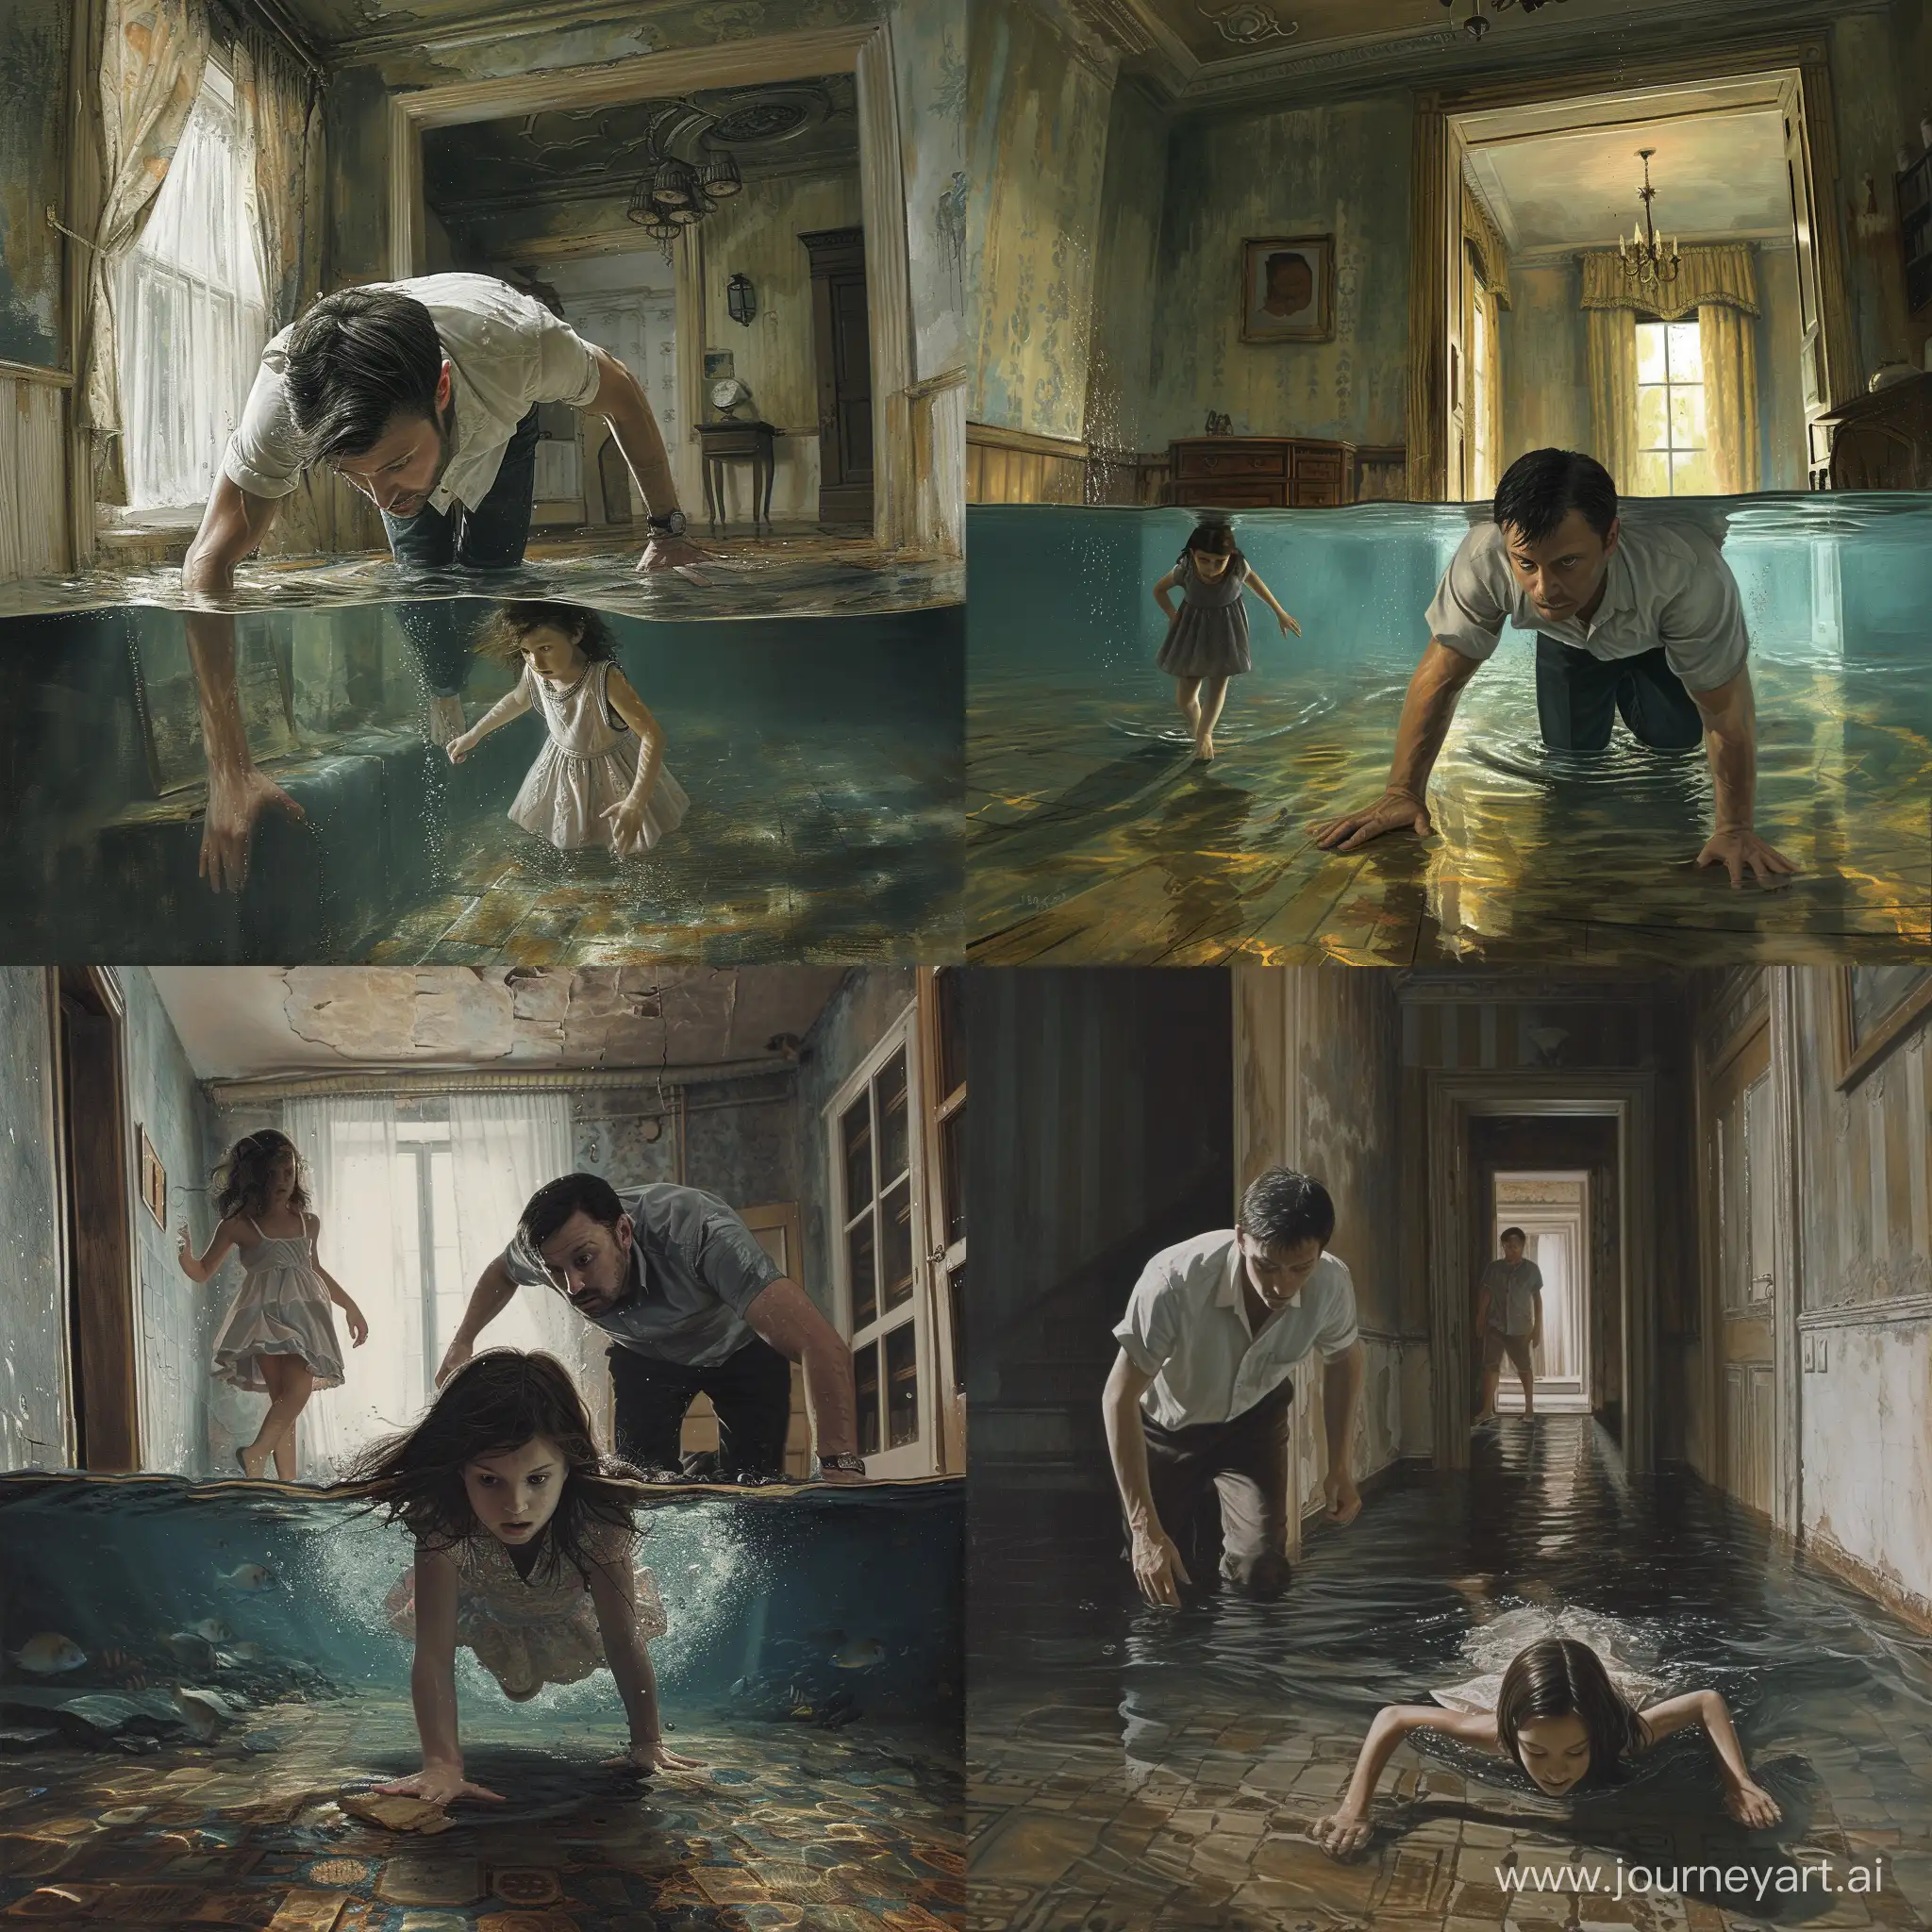 Exploration-of-Submerged-Memories-Father-and-Daughter-in-Abandoned-Homestead